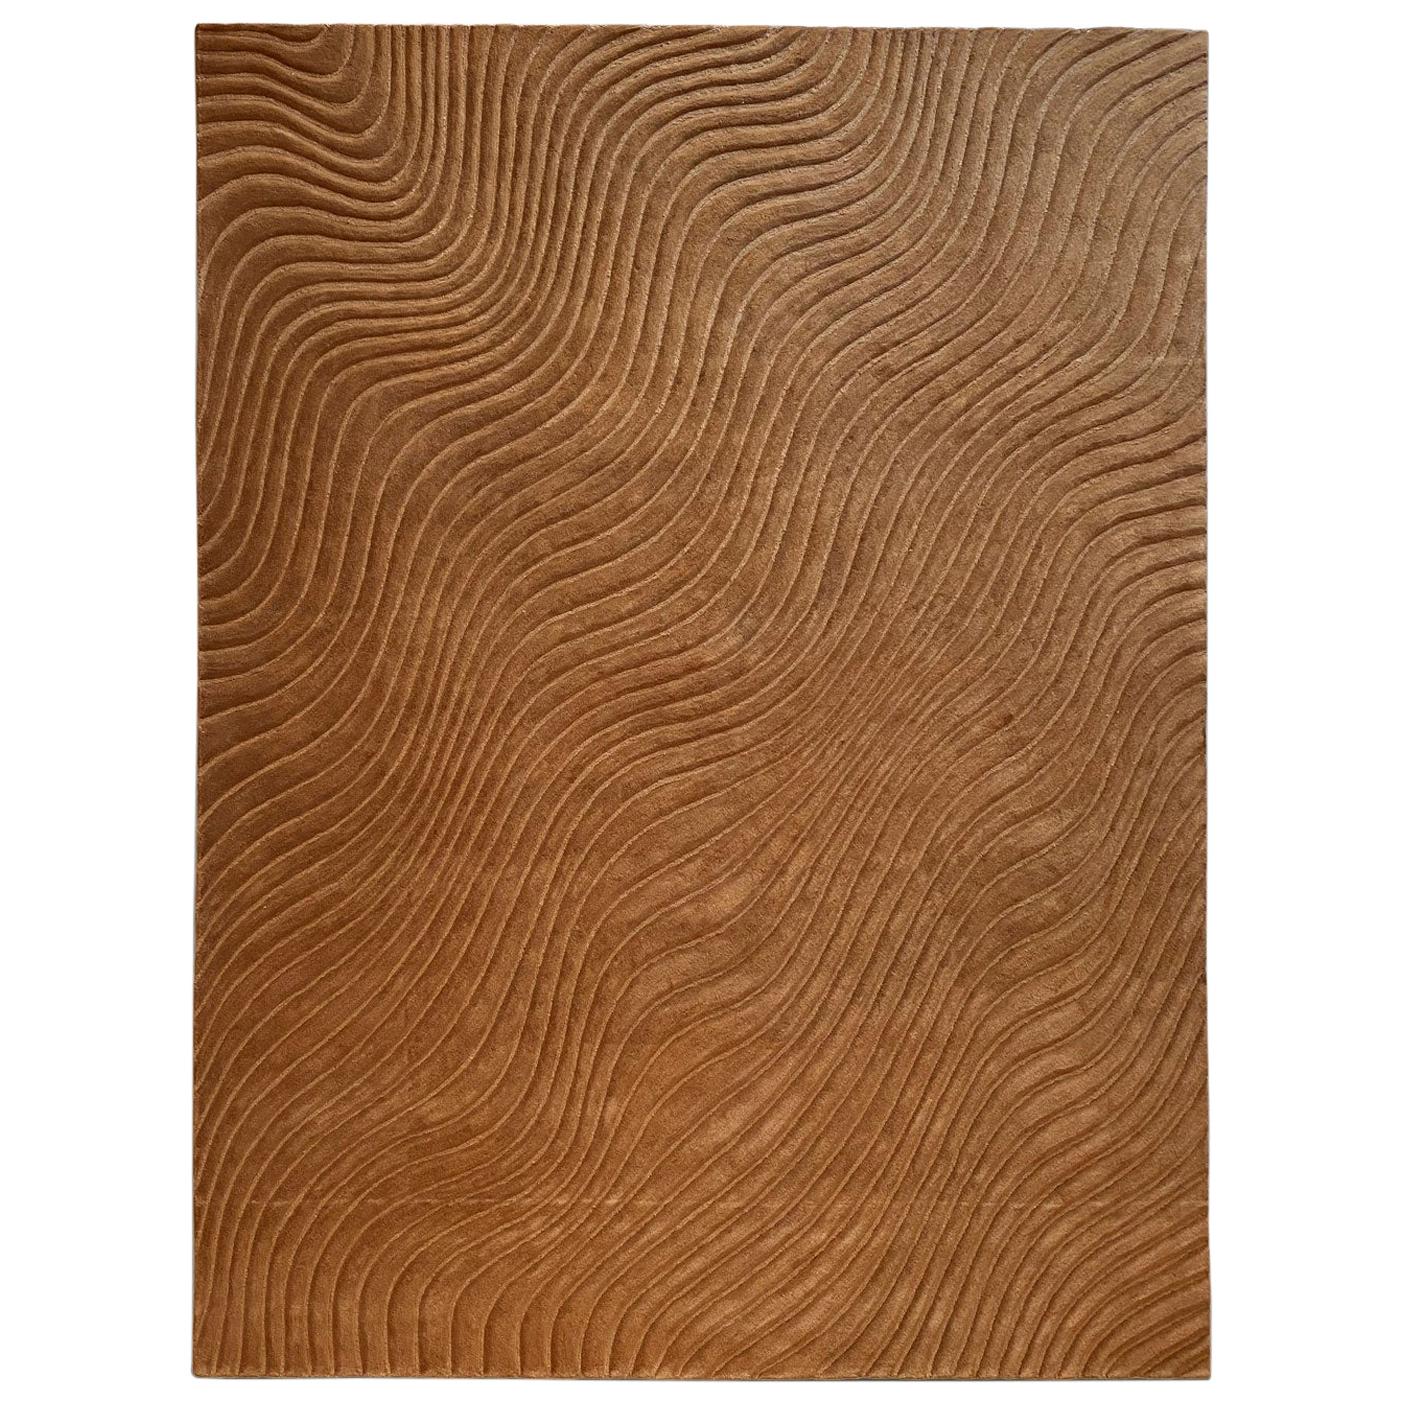 21st Cent Living Room Wool Warm Sandy Color Rug by Deanna Comellini 300x400 cm